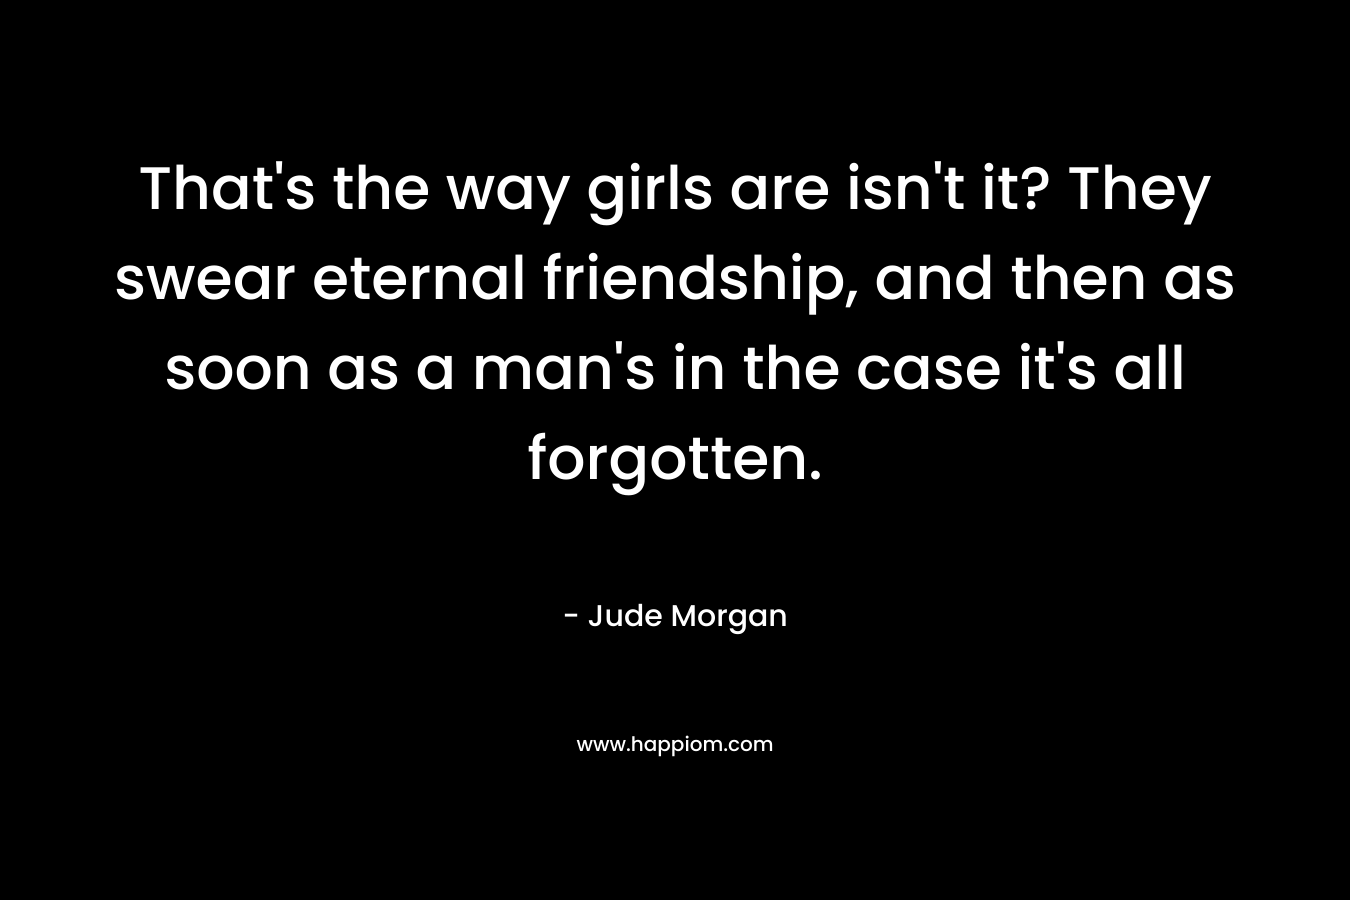 That's the way girls are isn't it? They swear eternal friendship, and then as soon as a man's in the case it's all forgotten.